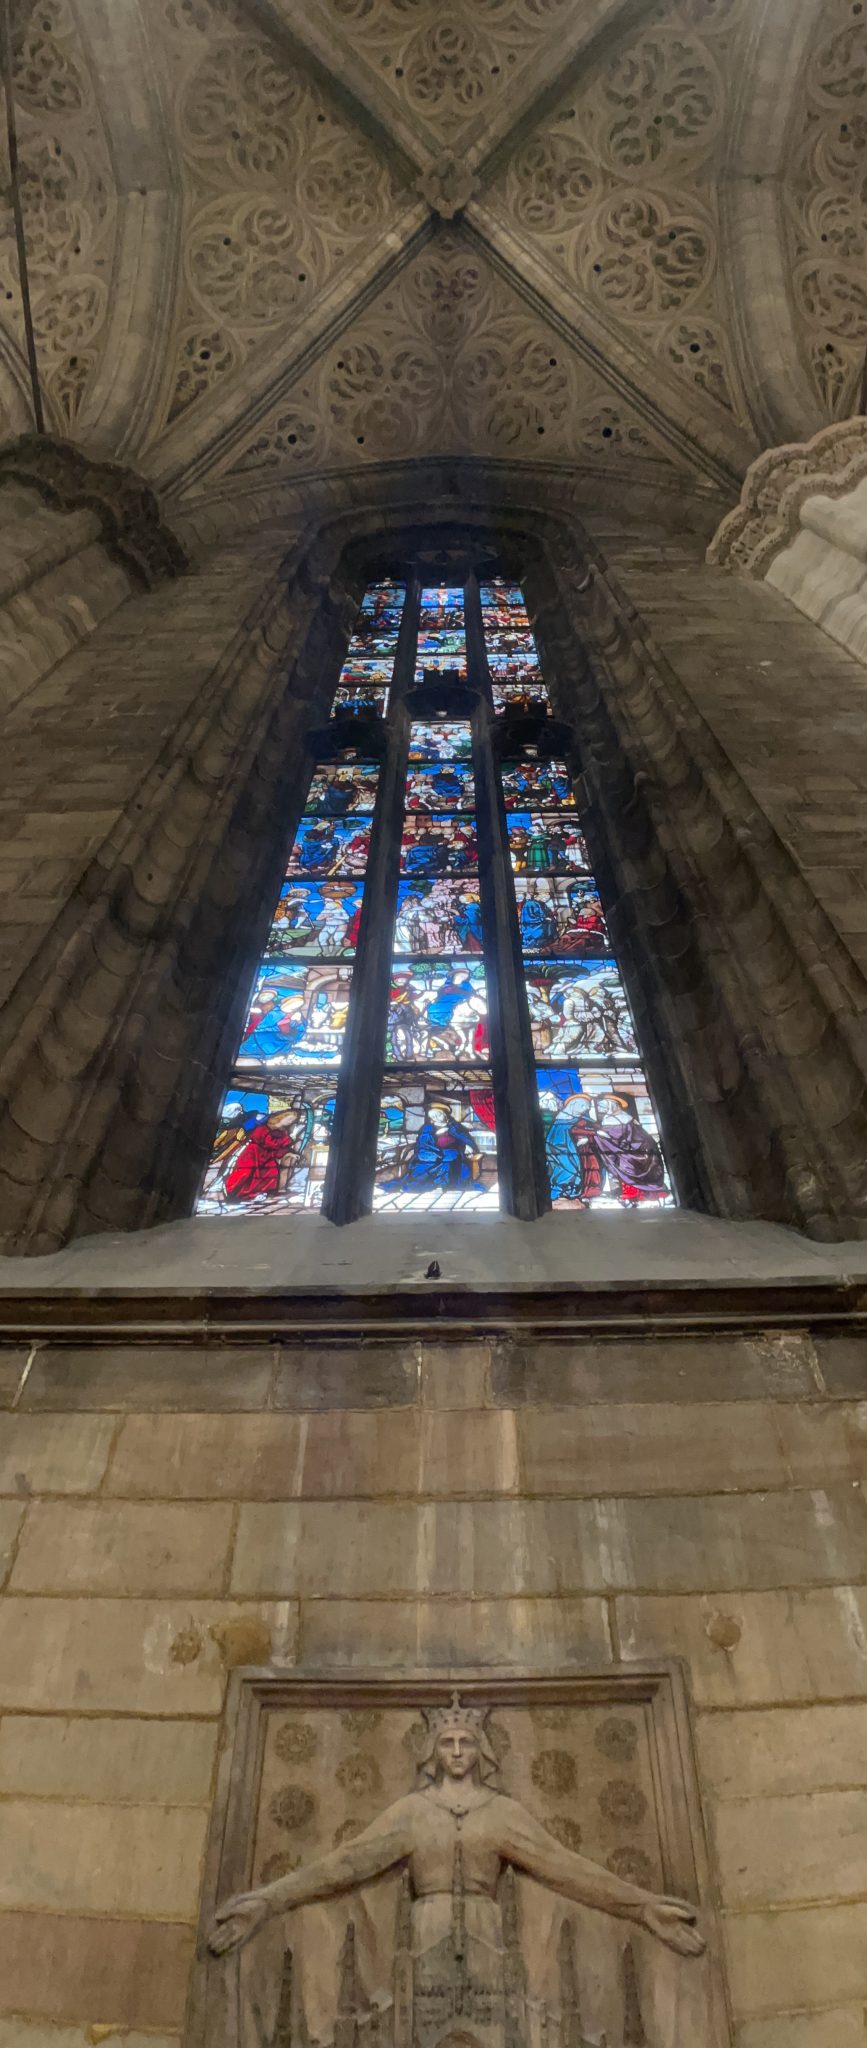 Stained glass window, Duomo De Milano, Milan, Italy, cathedral